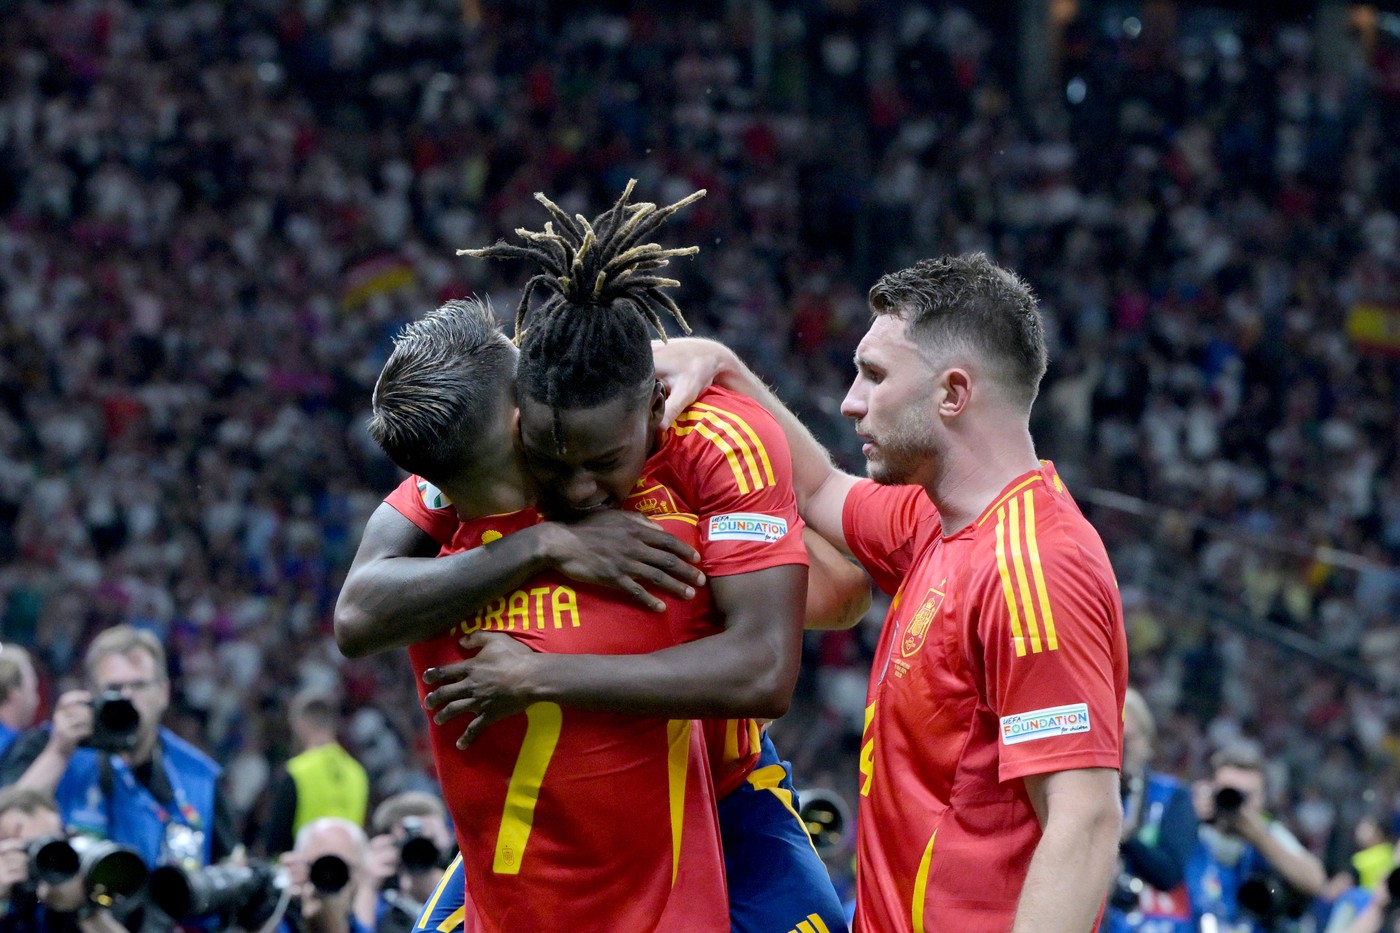 14 July 2024, Berlin: Soccer, UEFA Euro 2024, European Championship, Final, Spain - England, Olympiastadion Berlin, Spain's Nico Williams celebrates with Spain's Alvaro Morata (l) and Spain's Aymeric Laporte after his goal to make it 1-0 (M).,Image: 889715607, License: Rights-managed, Restrictions: , Model Release: no